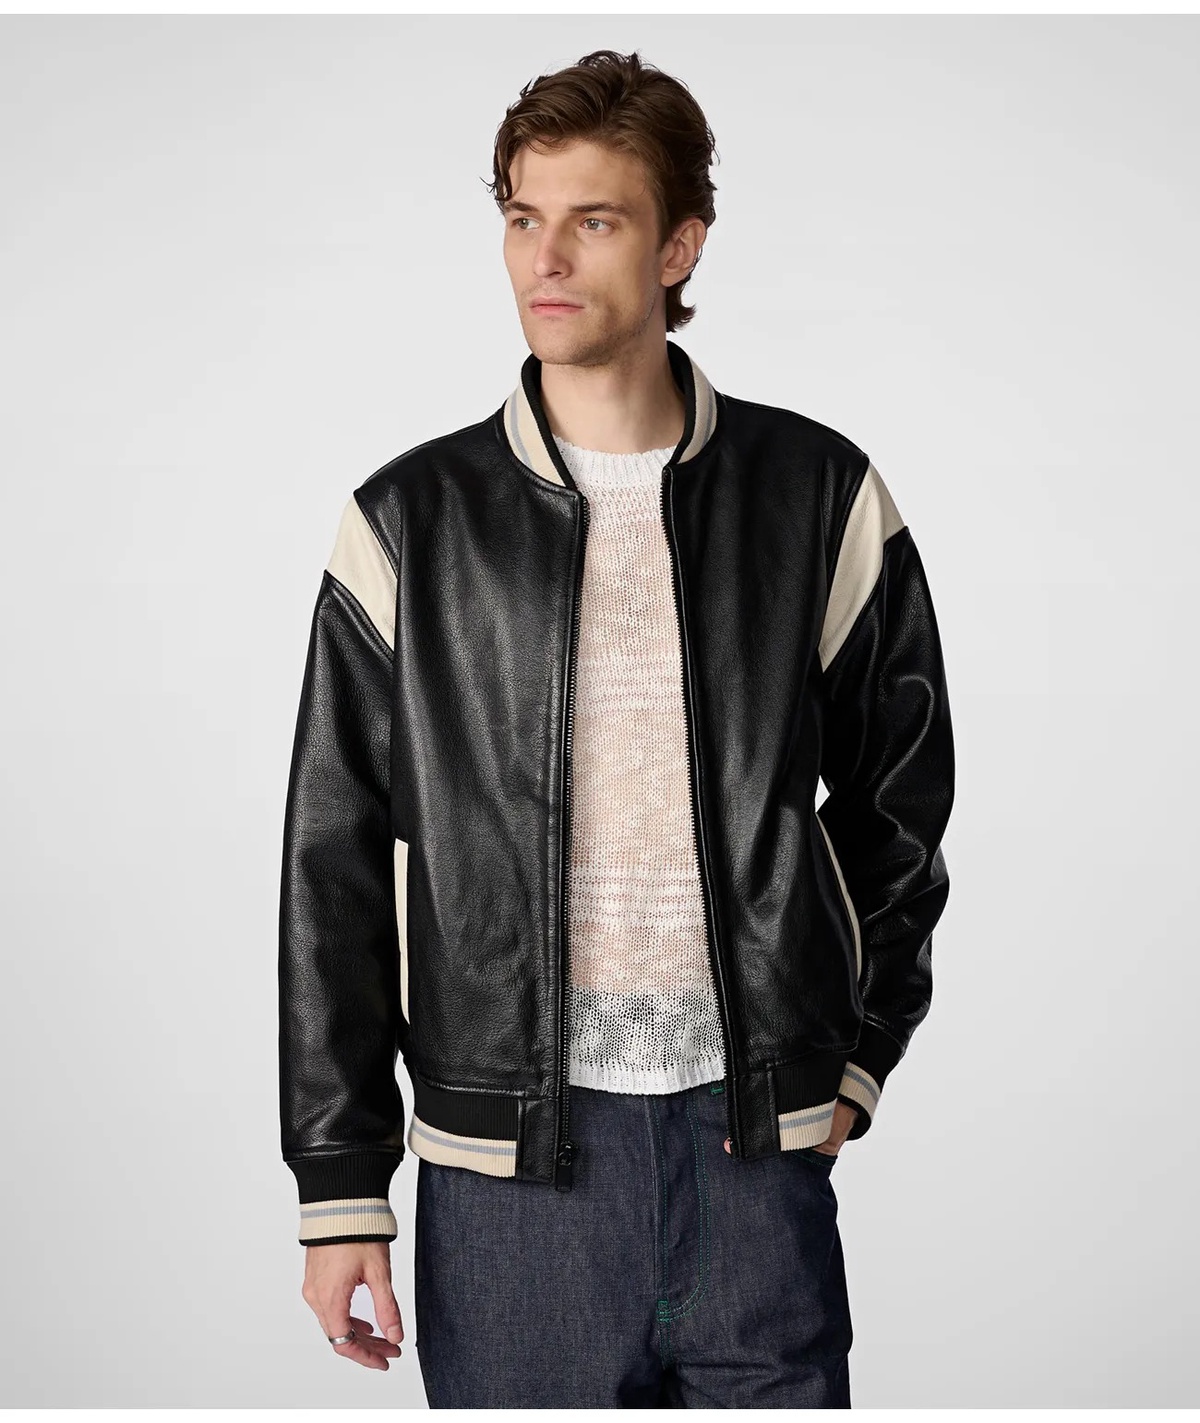 Dive into Luxury: Leather Varsity Jackets for Men